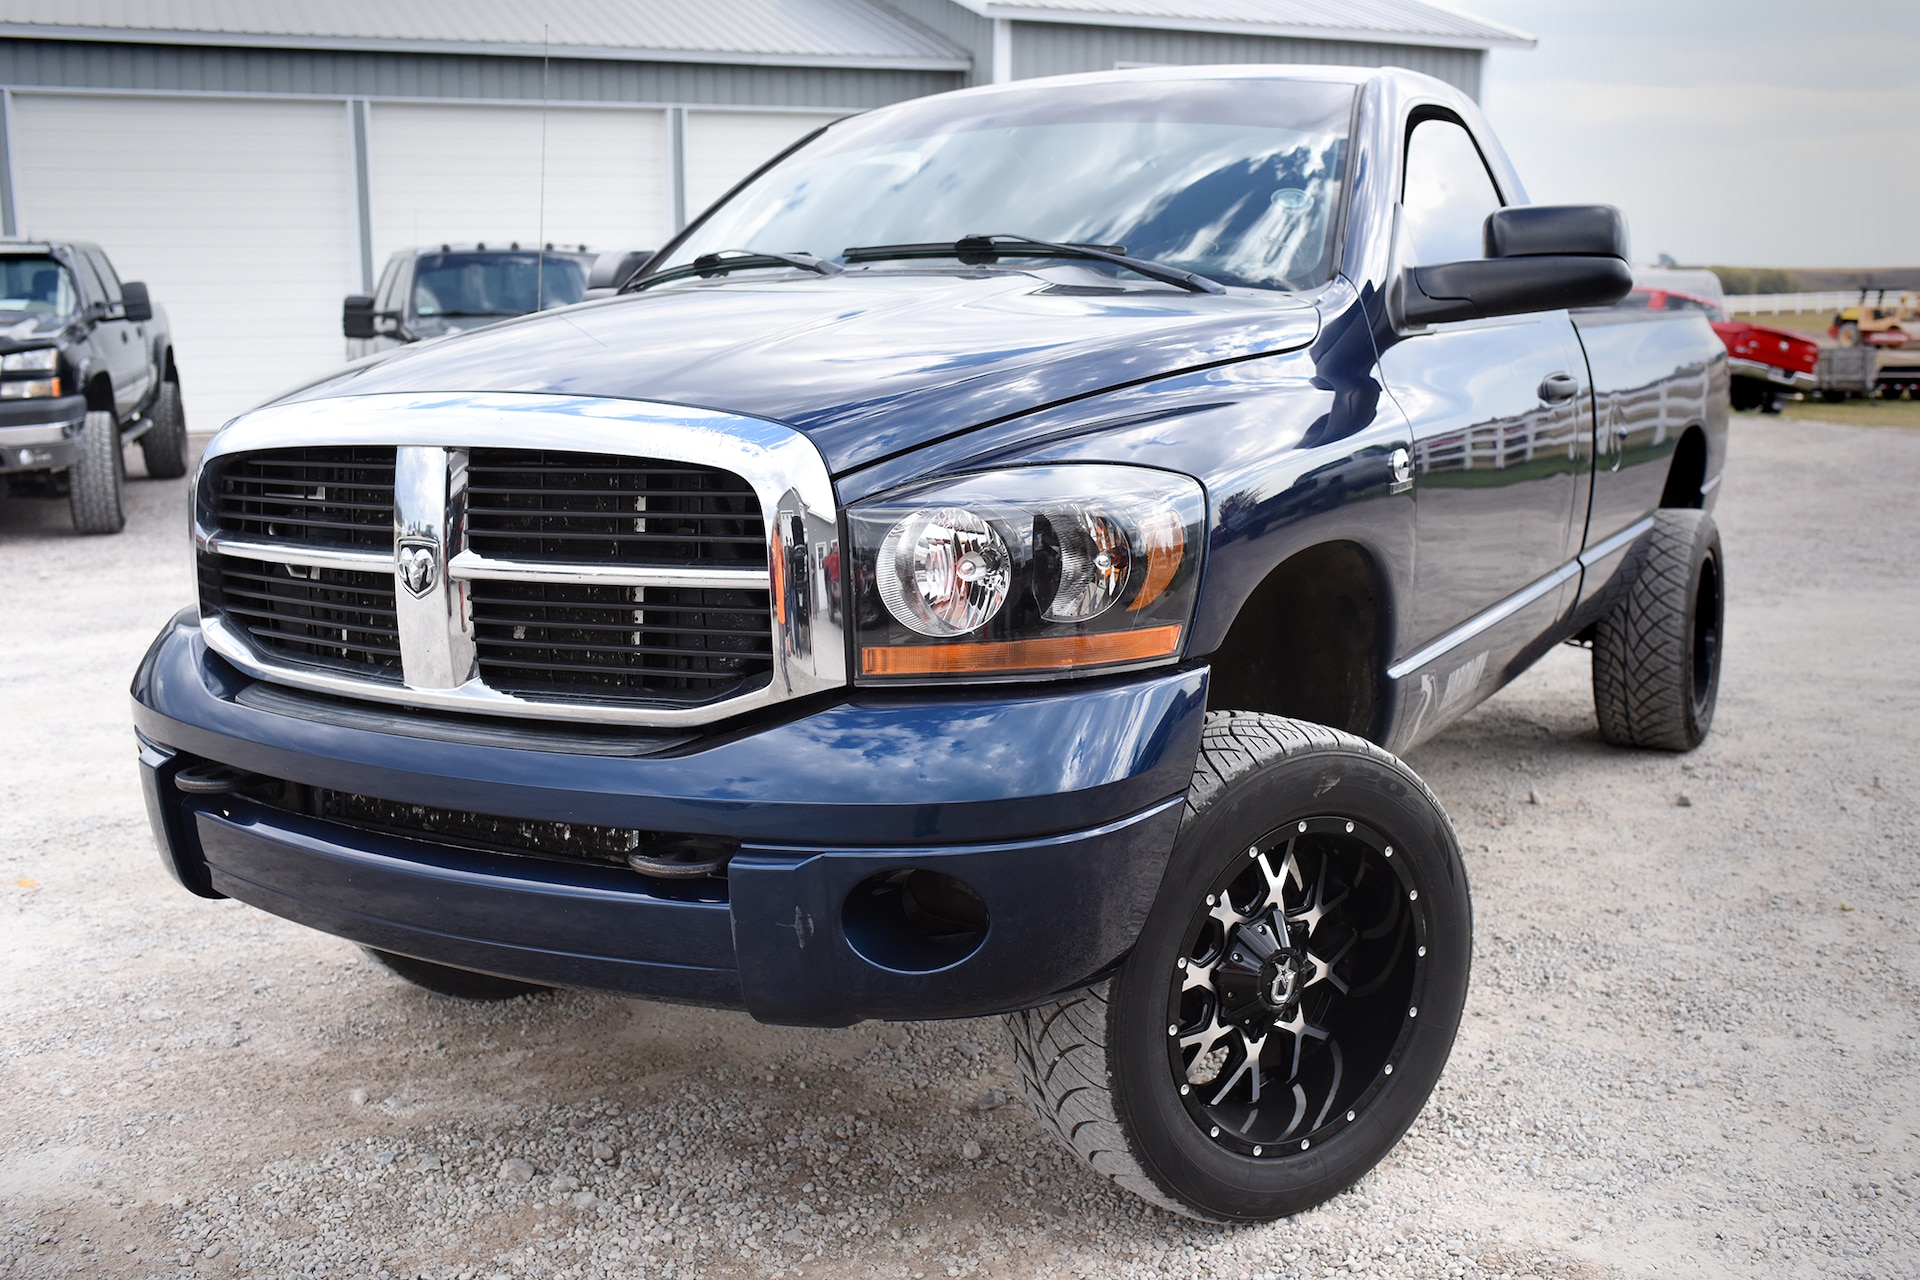 From Sport Bike to Sport Truck - This 2006 Dodge Ram 2500 Is a Torque  Monster